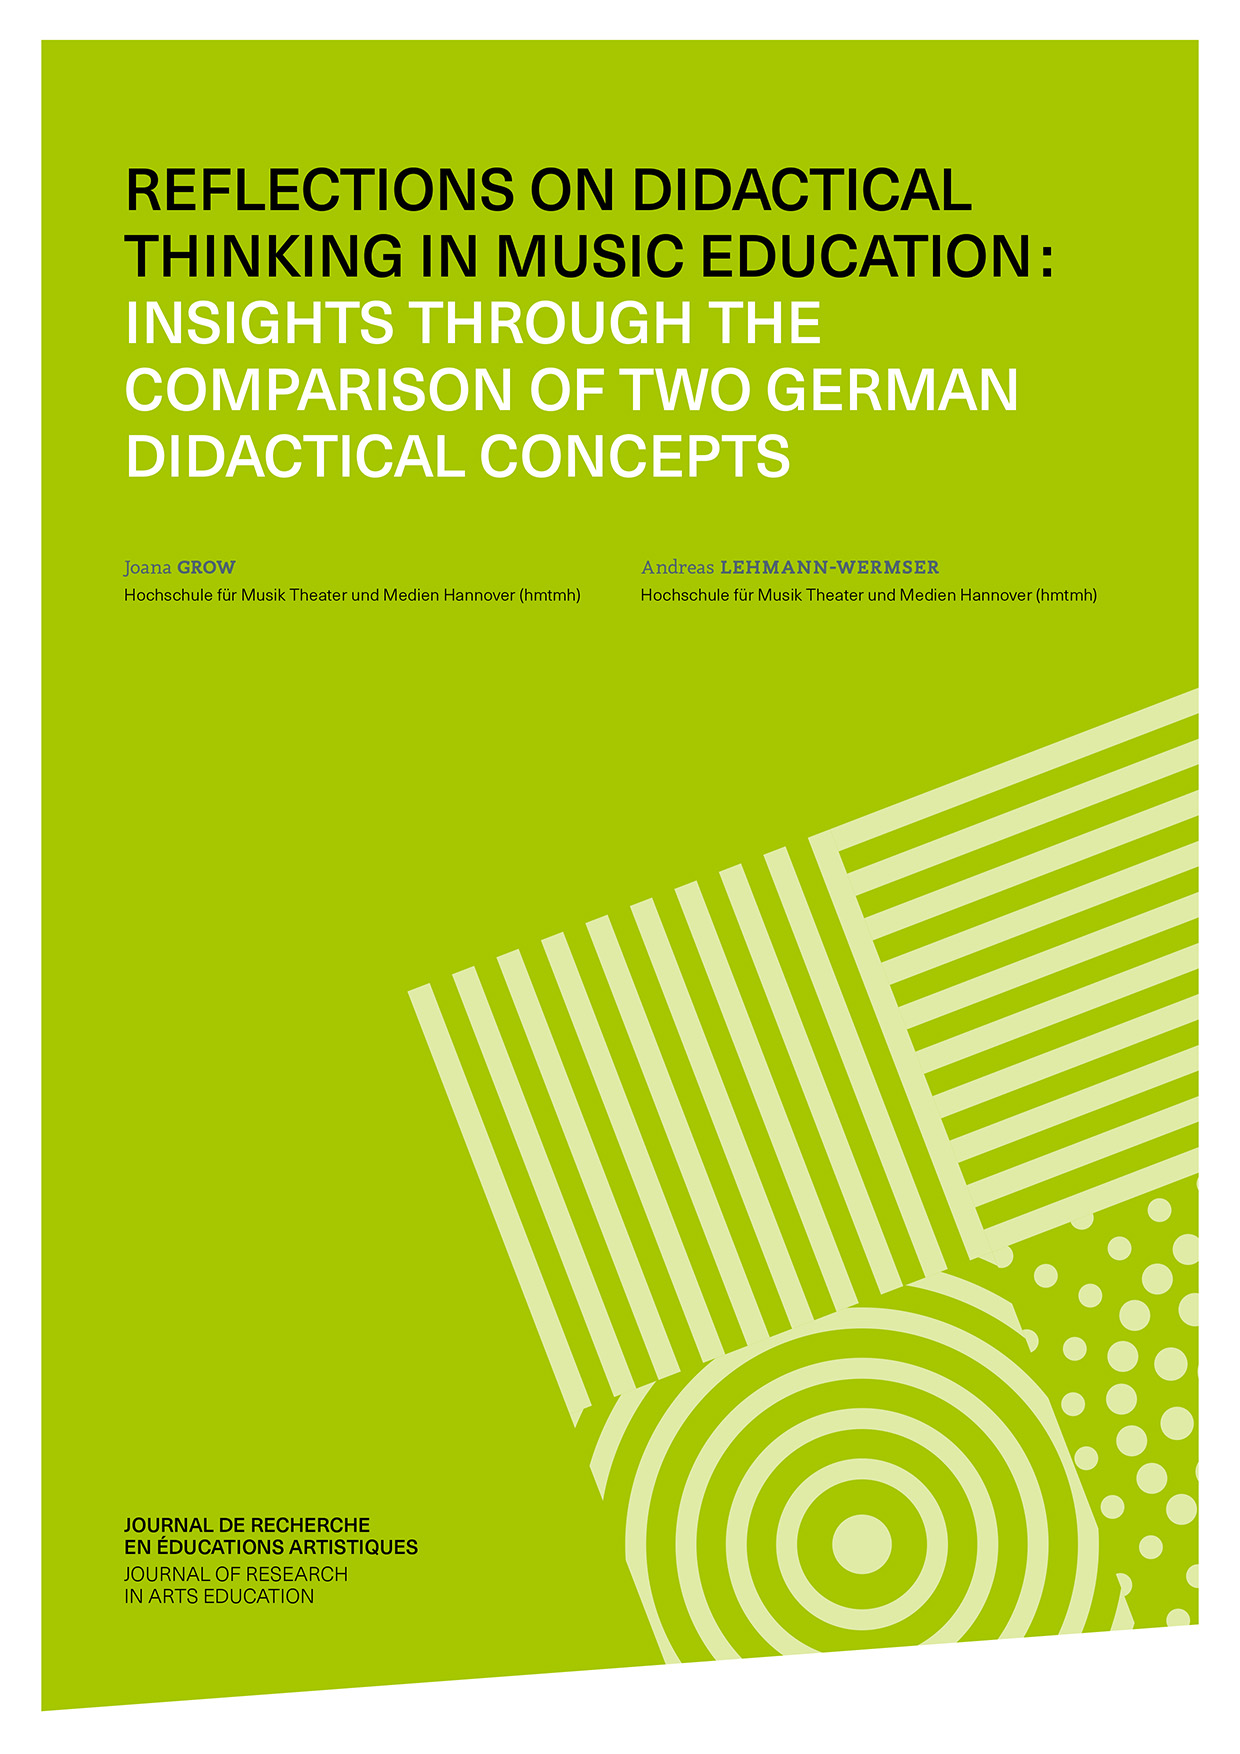 Couverture: Reflections on didactical thinking in music education 